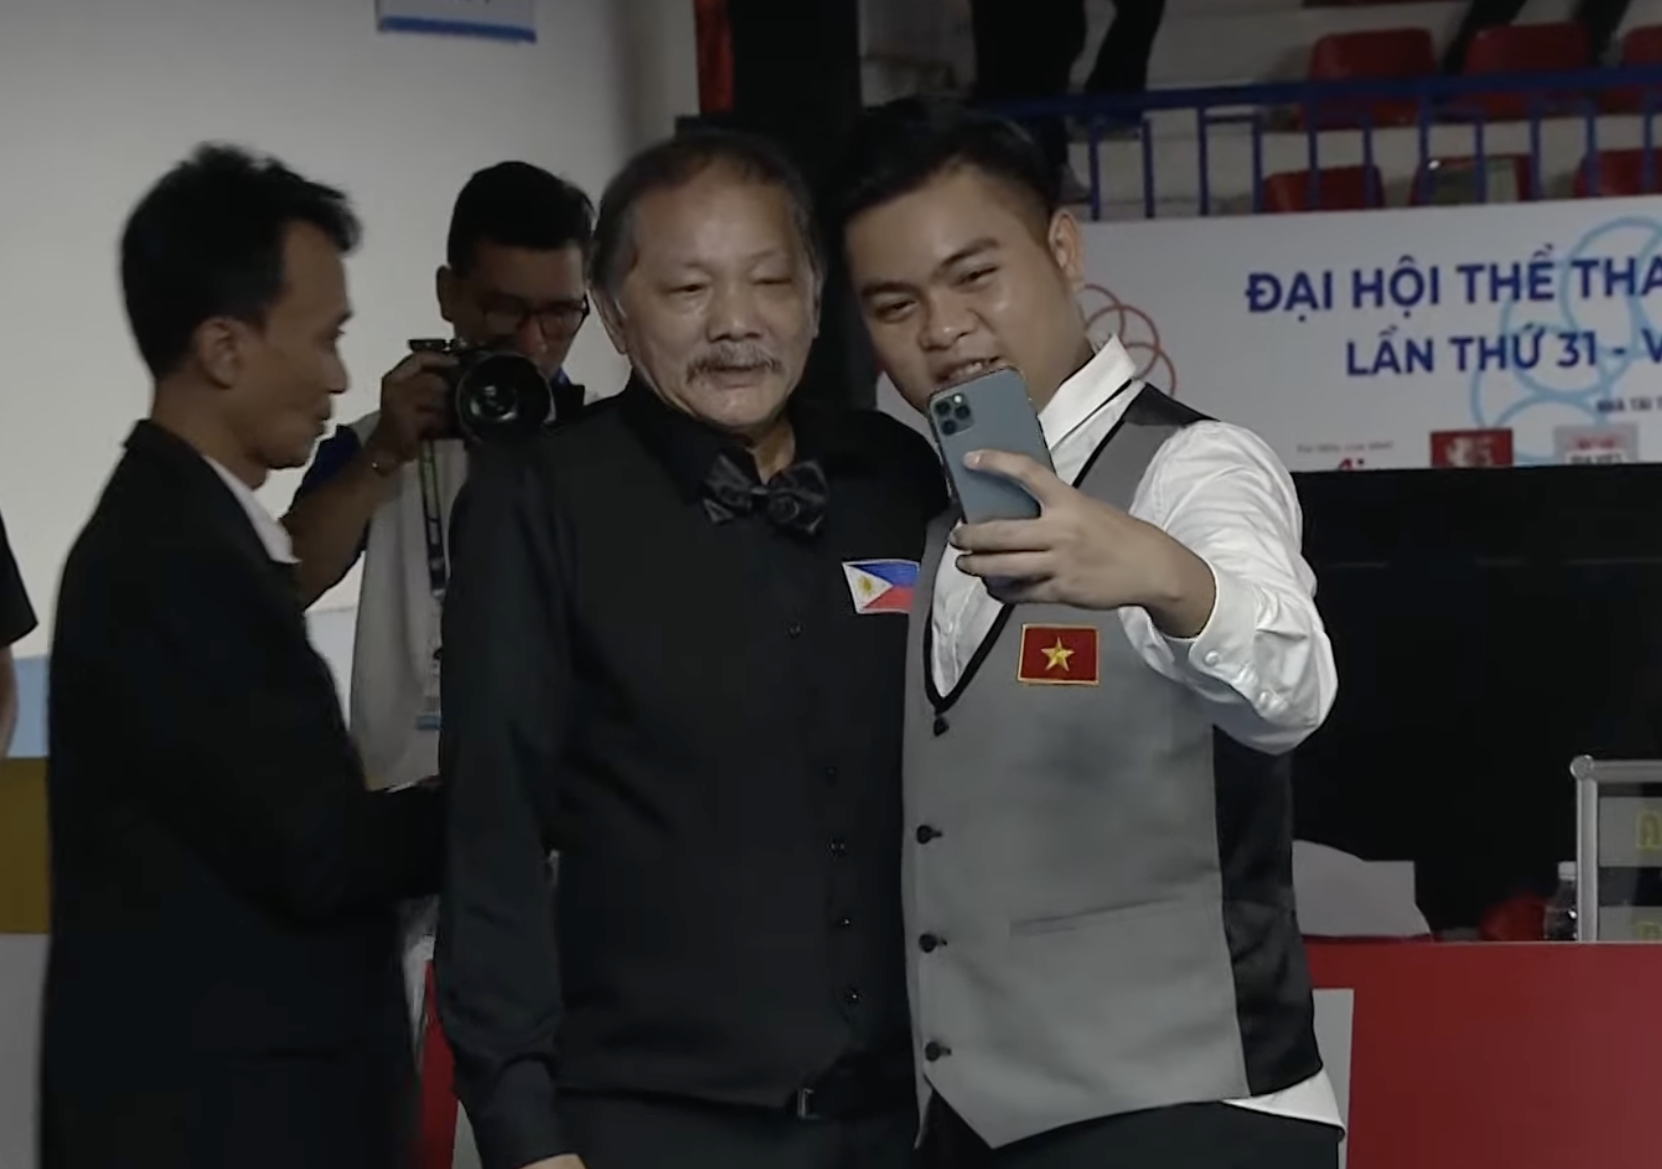 Vietnamese winner Tranh Thanh Tu Nguyen takes a selfie with Efren "Bata" Reyes after their men's 1-cushion carom match in the 31st SEA Games. 